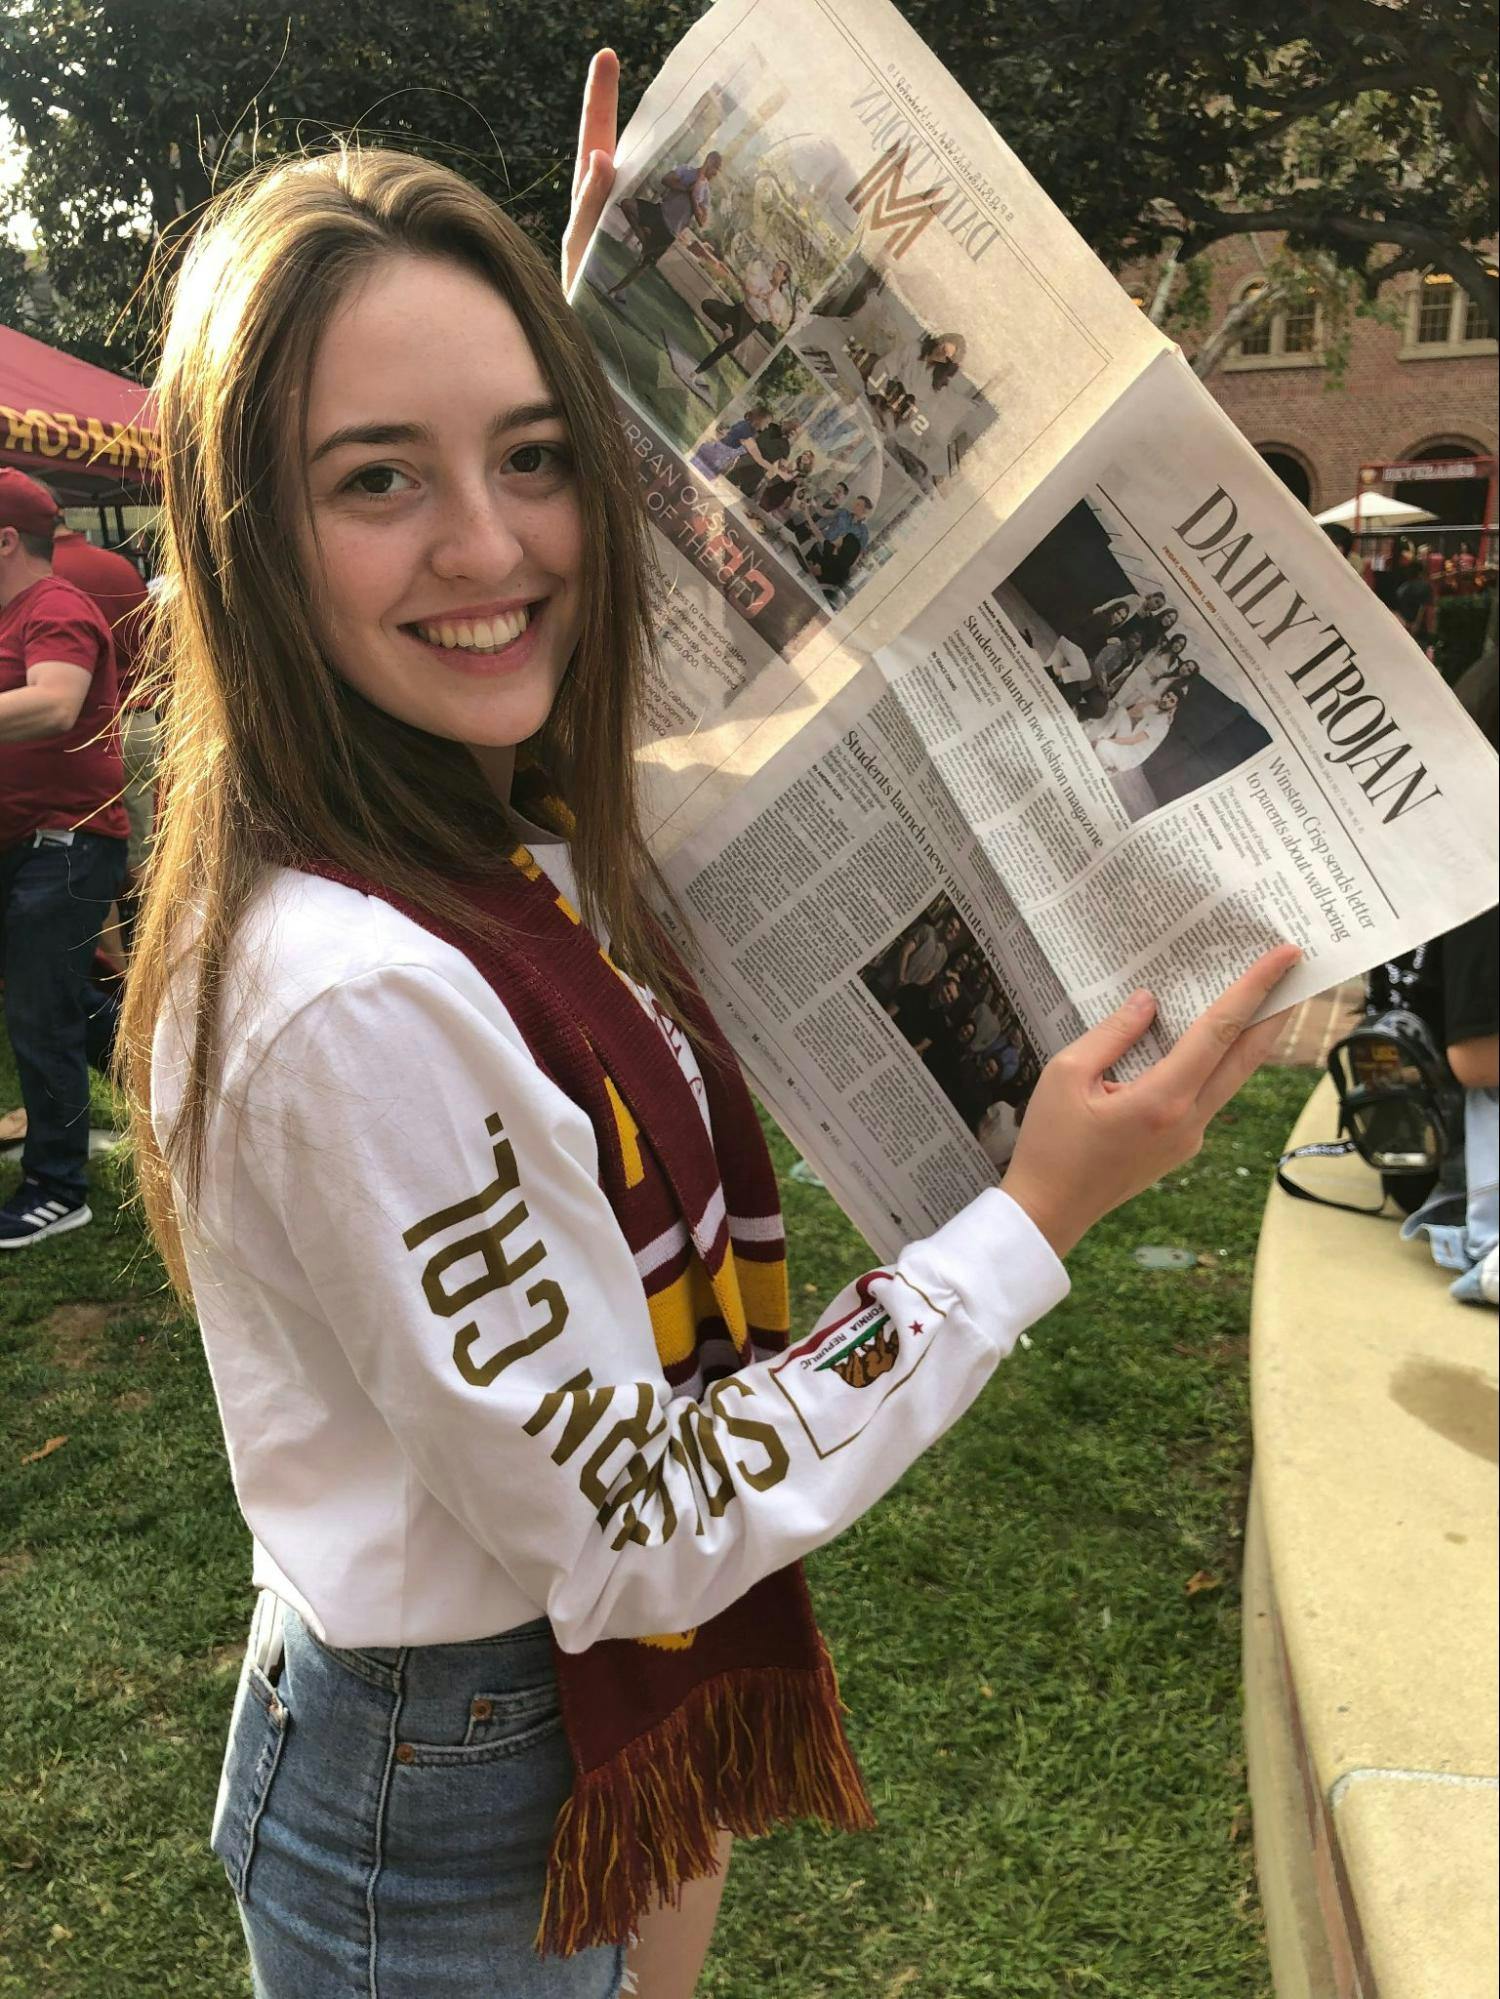 A young woman in USC clothes holds up a copy of the Daily Trojan